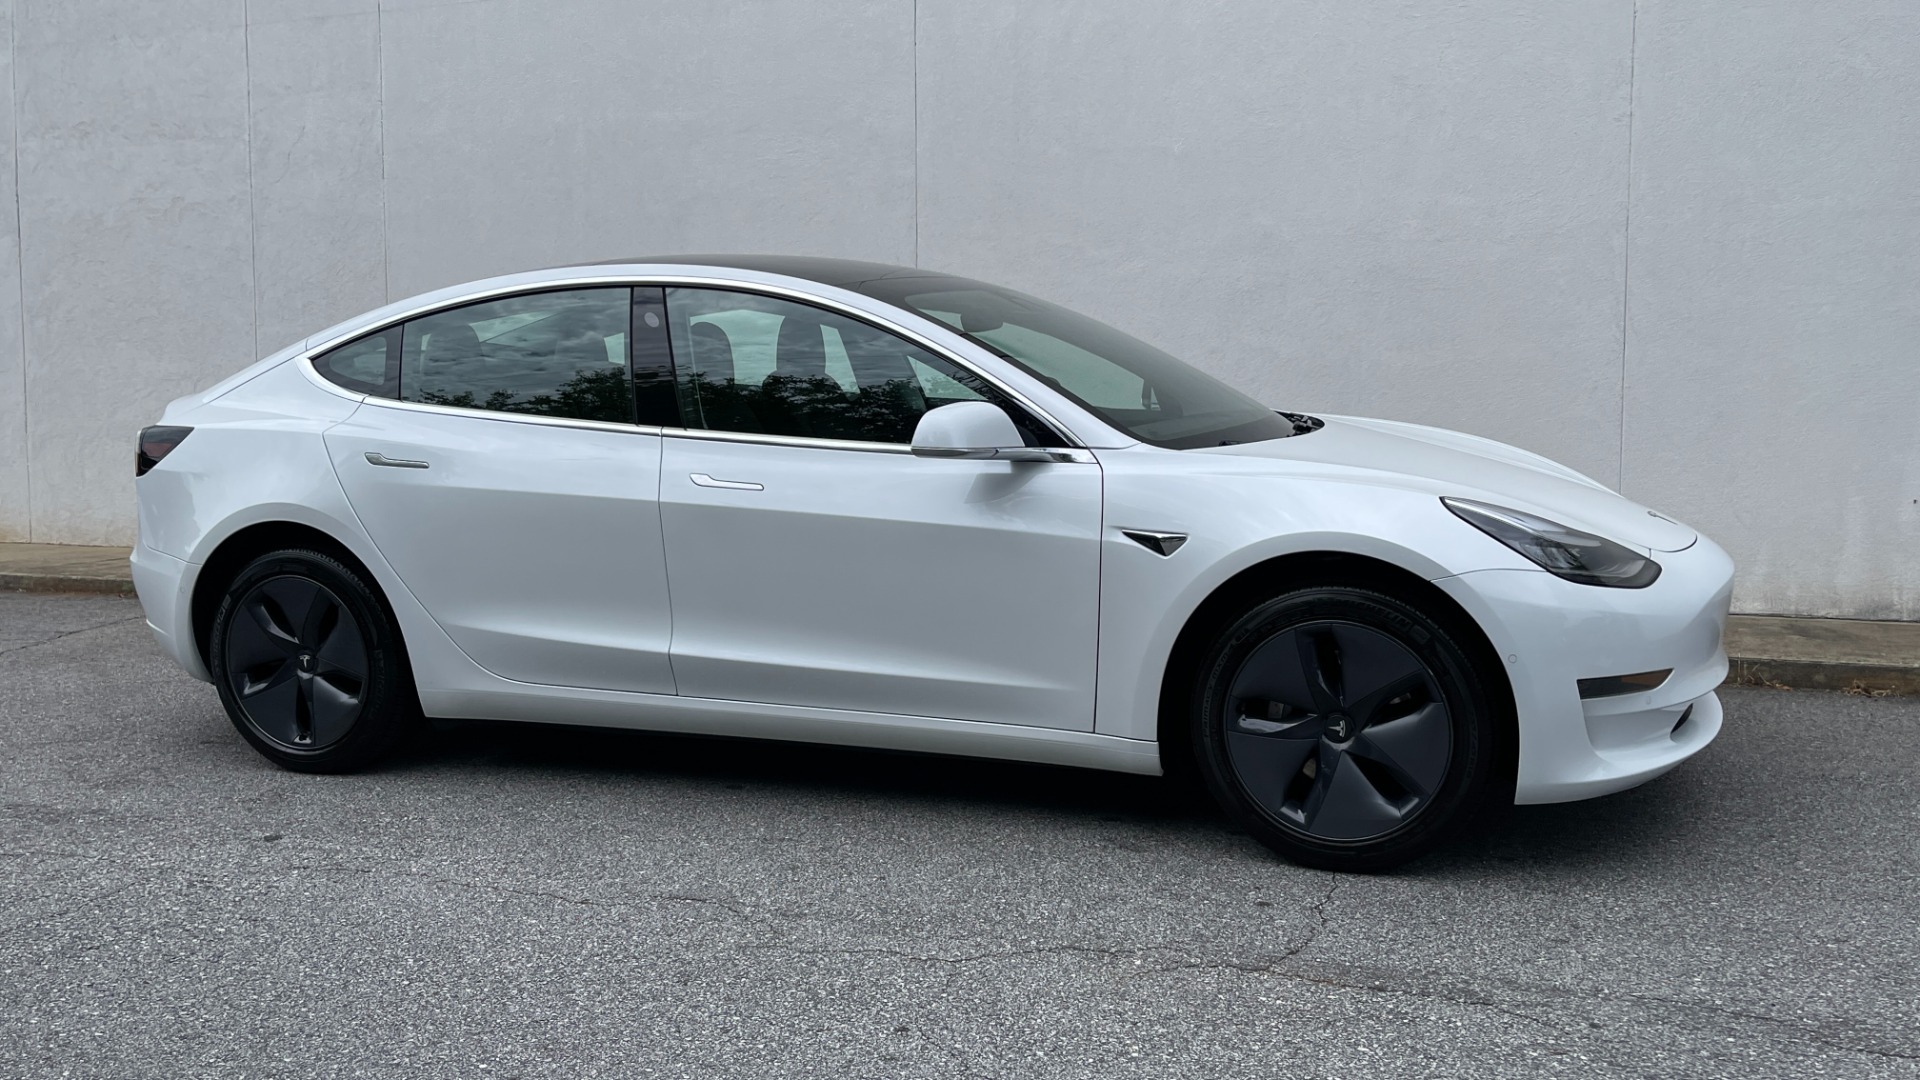 Used 2020 Tesla Model 3 STANDARD RANGE PLUS / AUTOPILOT / STANDARD CONNECTIVITY / PEARL WHITE for sale $49,595 at Formula Imports in Charlotte NC 28227 3